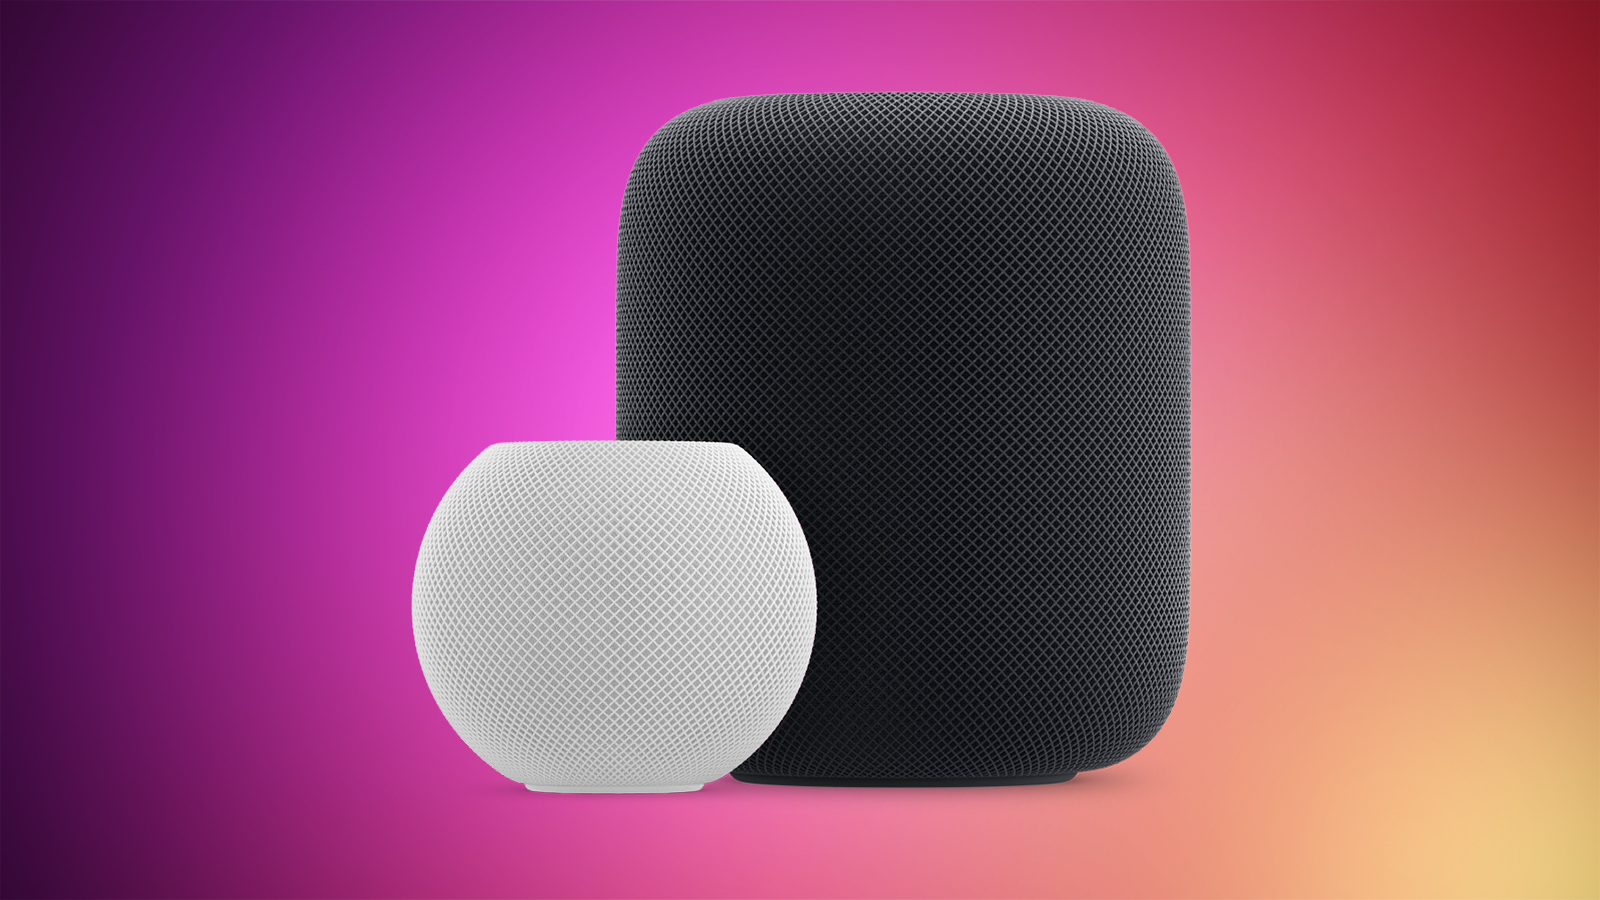 Siri on HomePod Seems to Have Forgotten How to Give the Time